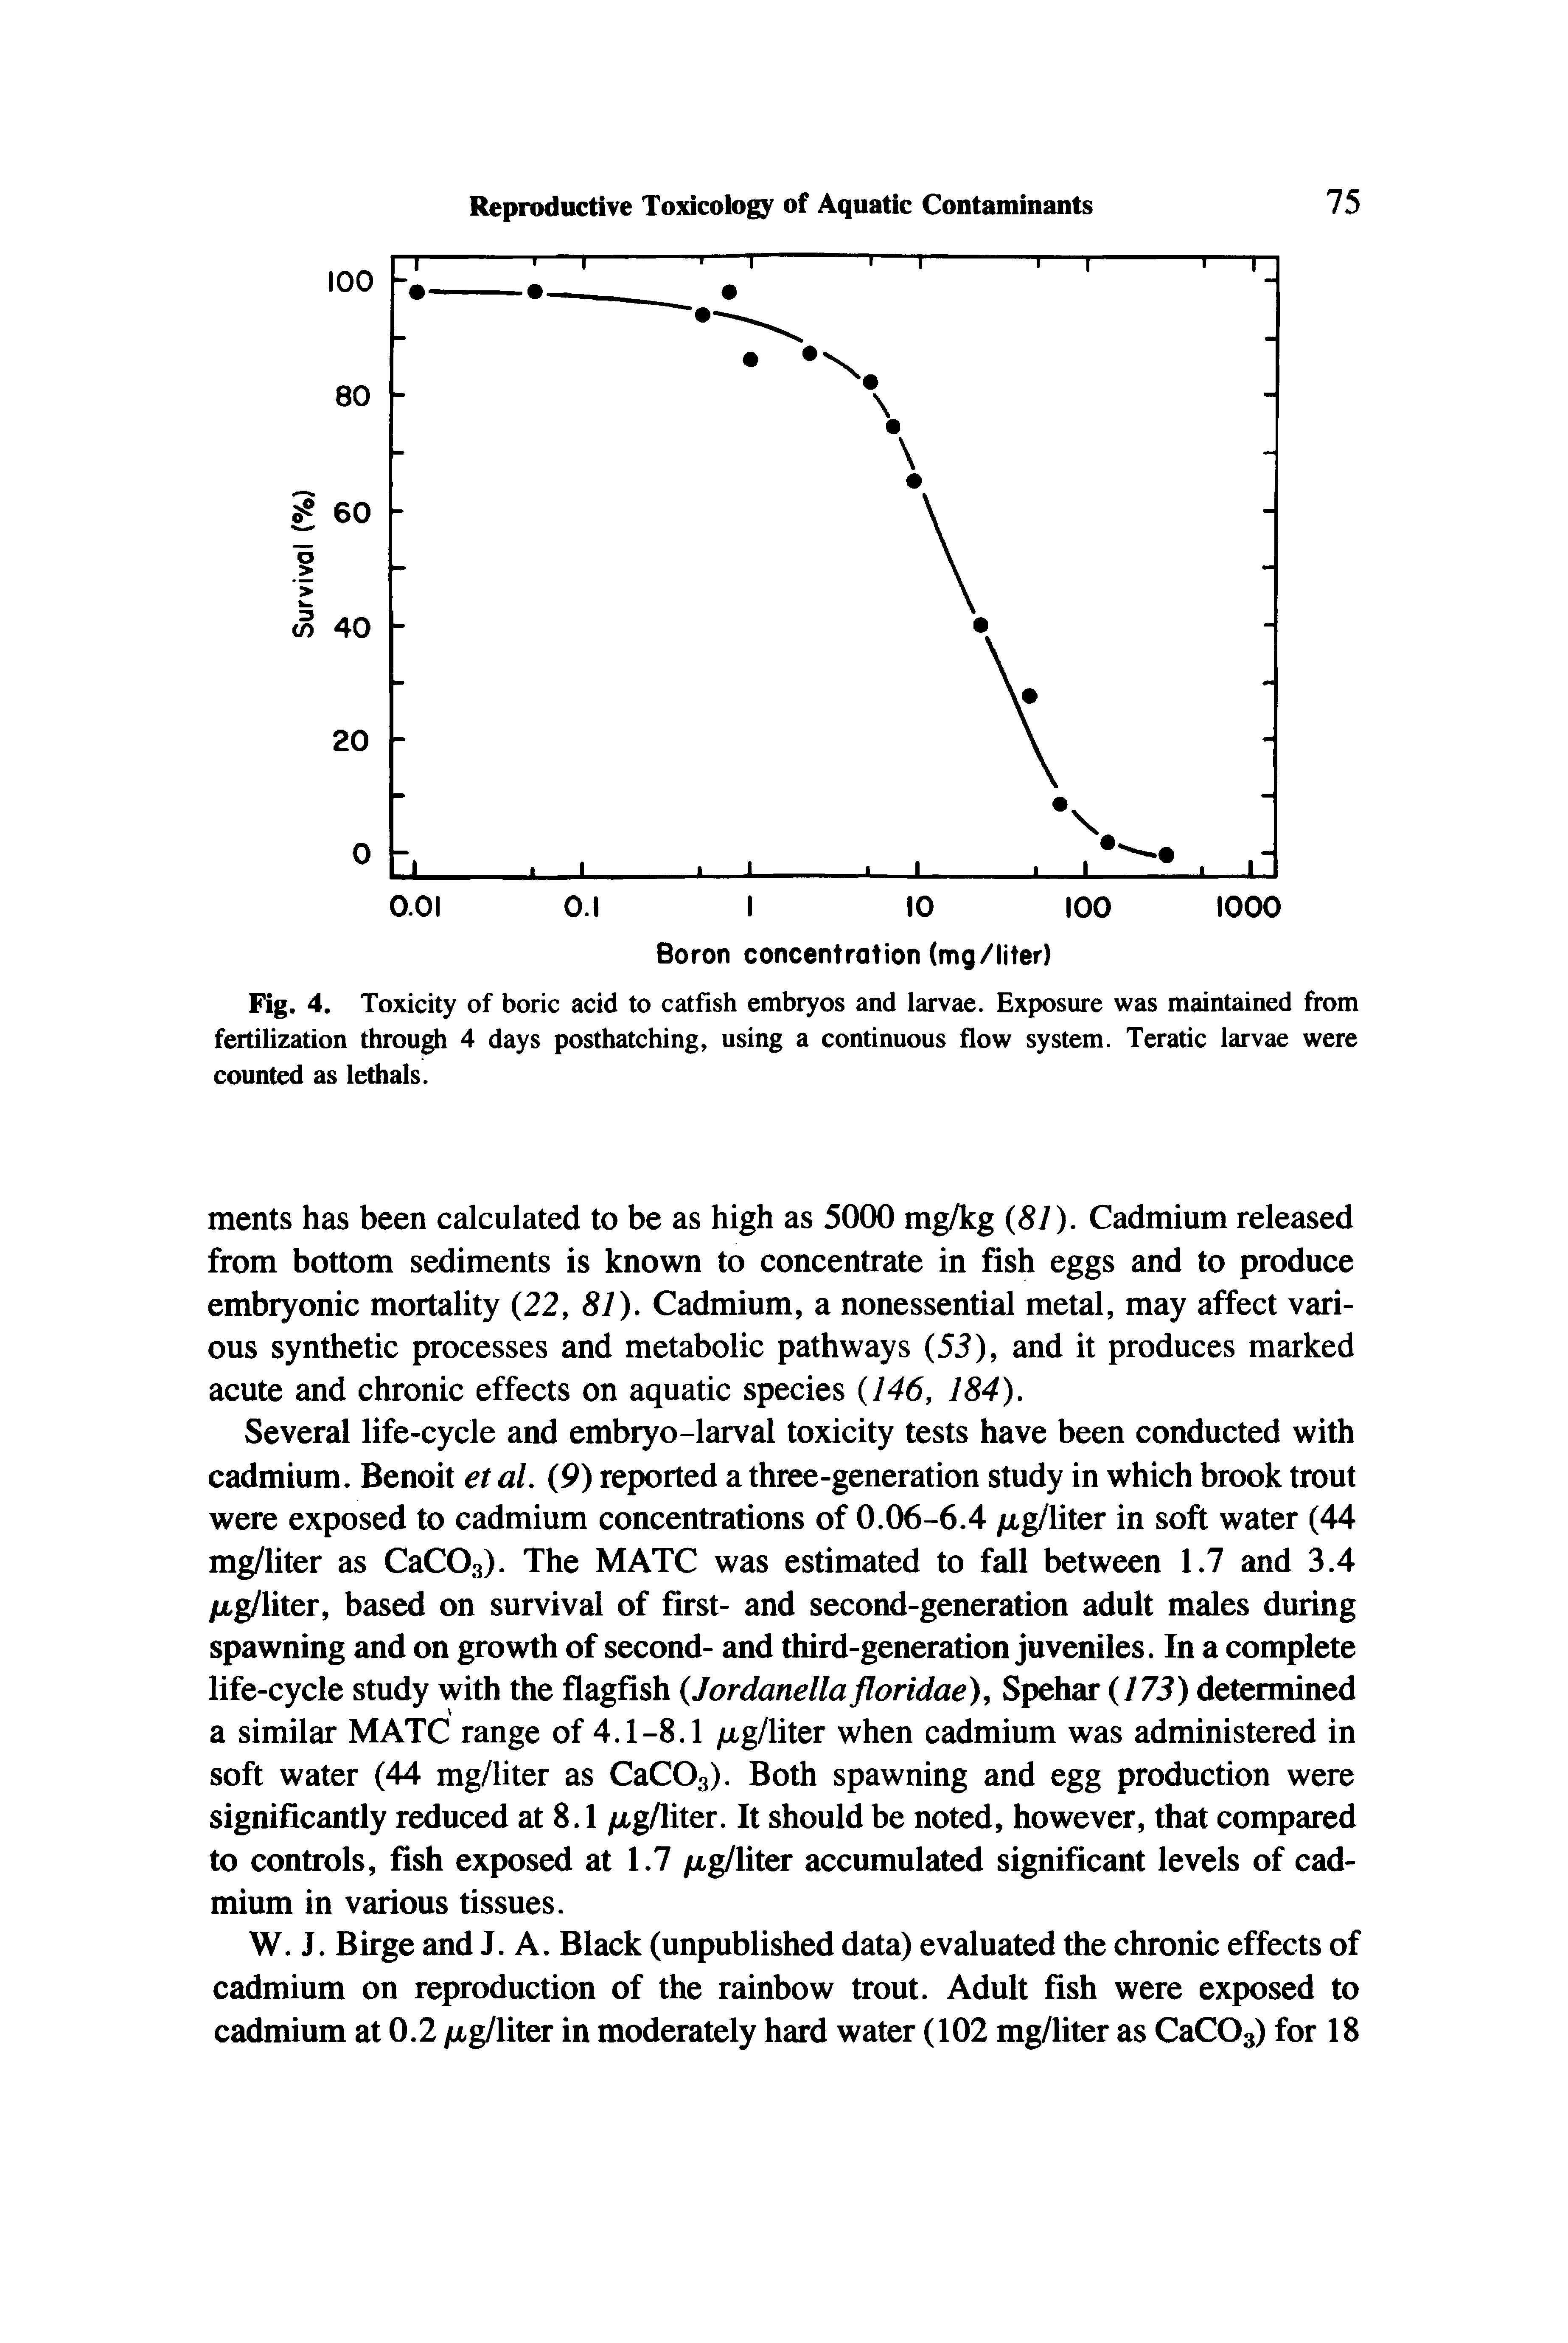 Fig. 4. Toxicity of boric acid to catfish embryos and larvae. Exposure was maintained from fertilization through 4 days posthatching, using a continuous flow system. Teratic larvae were counted as lethals.